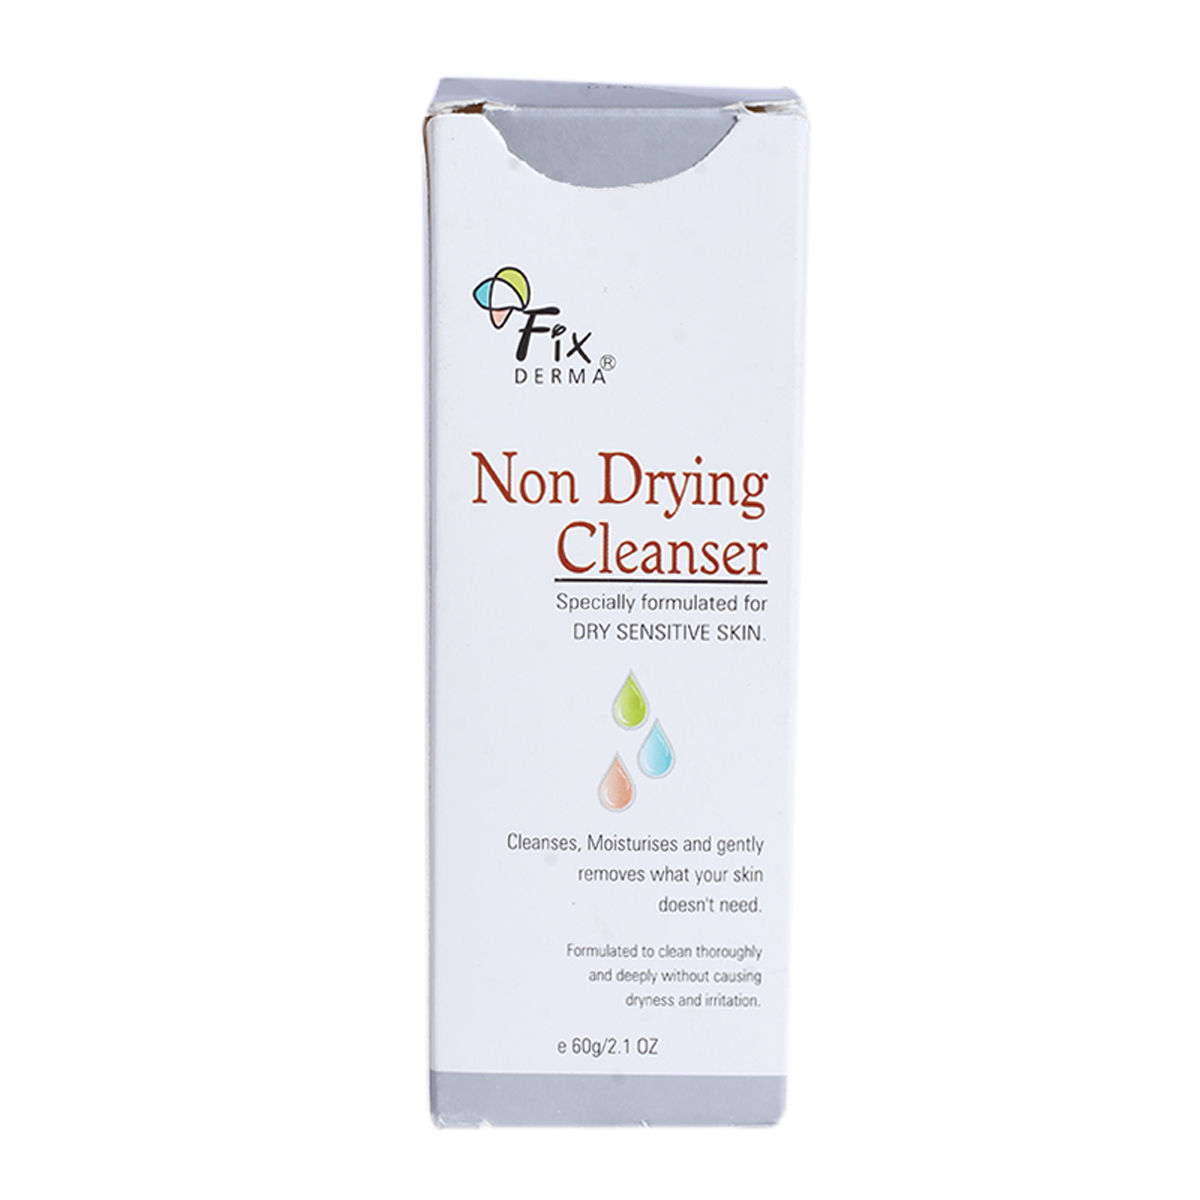 Fix Derma Non Drying Cleanser 60 gm, Pack of 1 